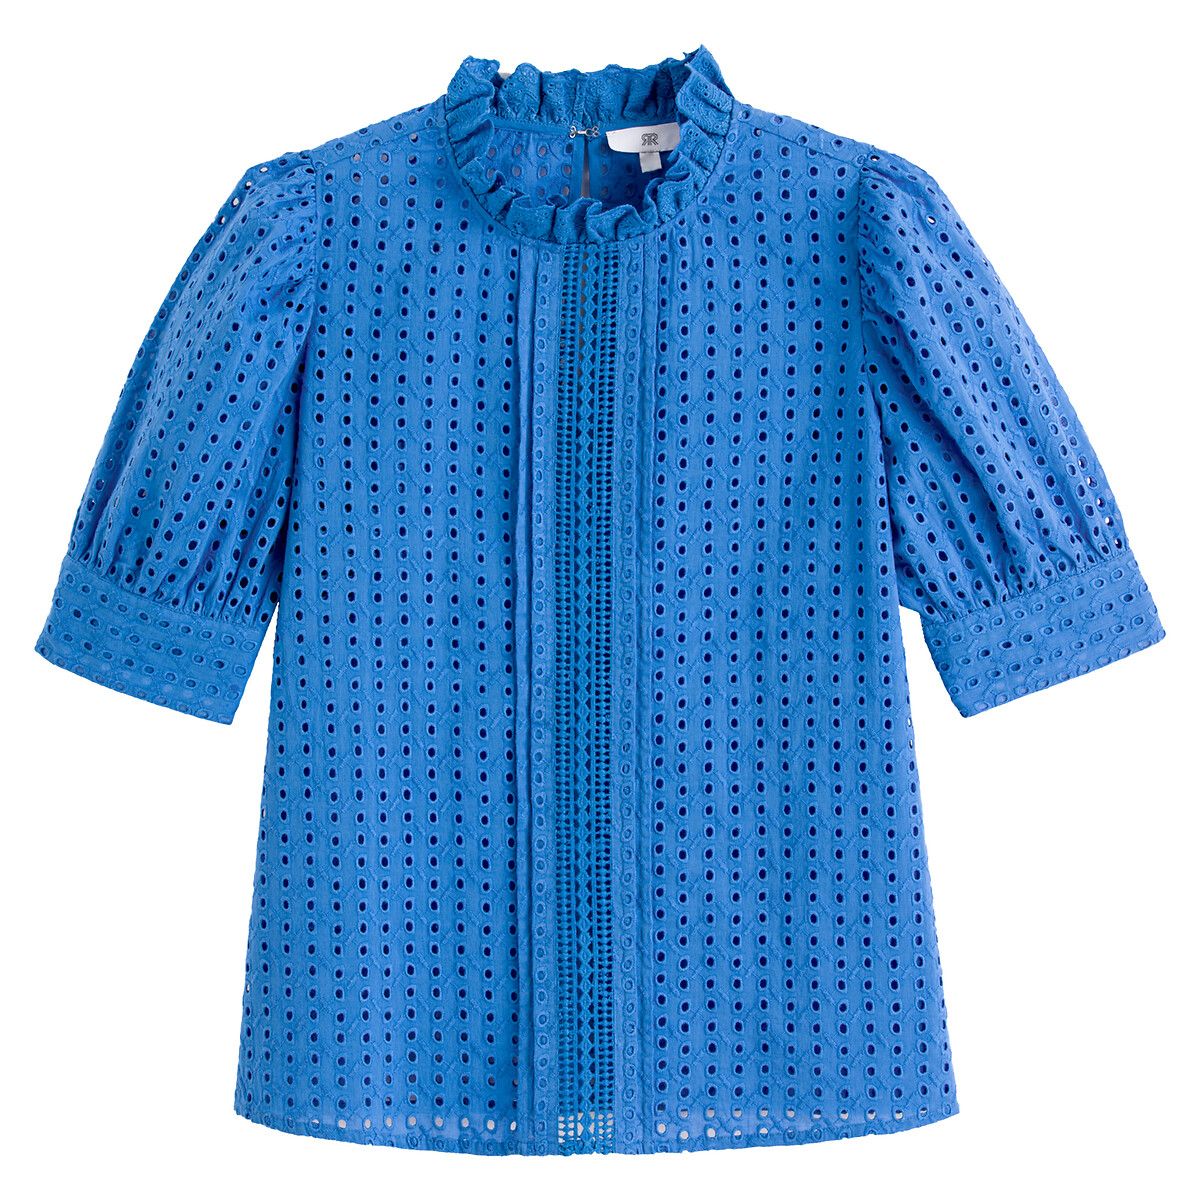 Cotton Broderie Anglaise Blouse with Ruffled High Neck | La Redoute (UK)